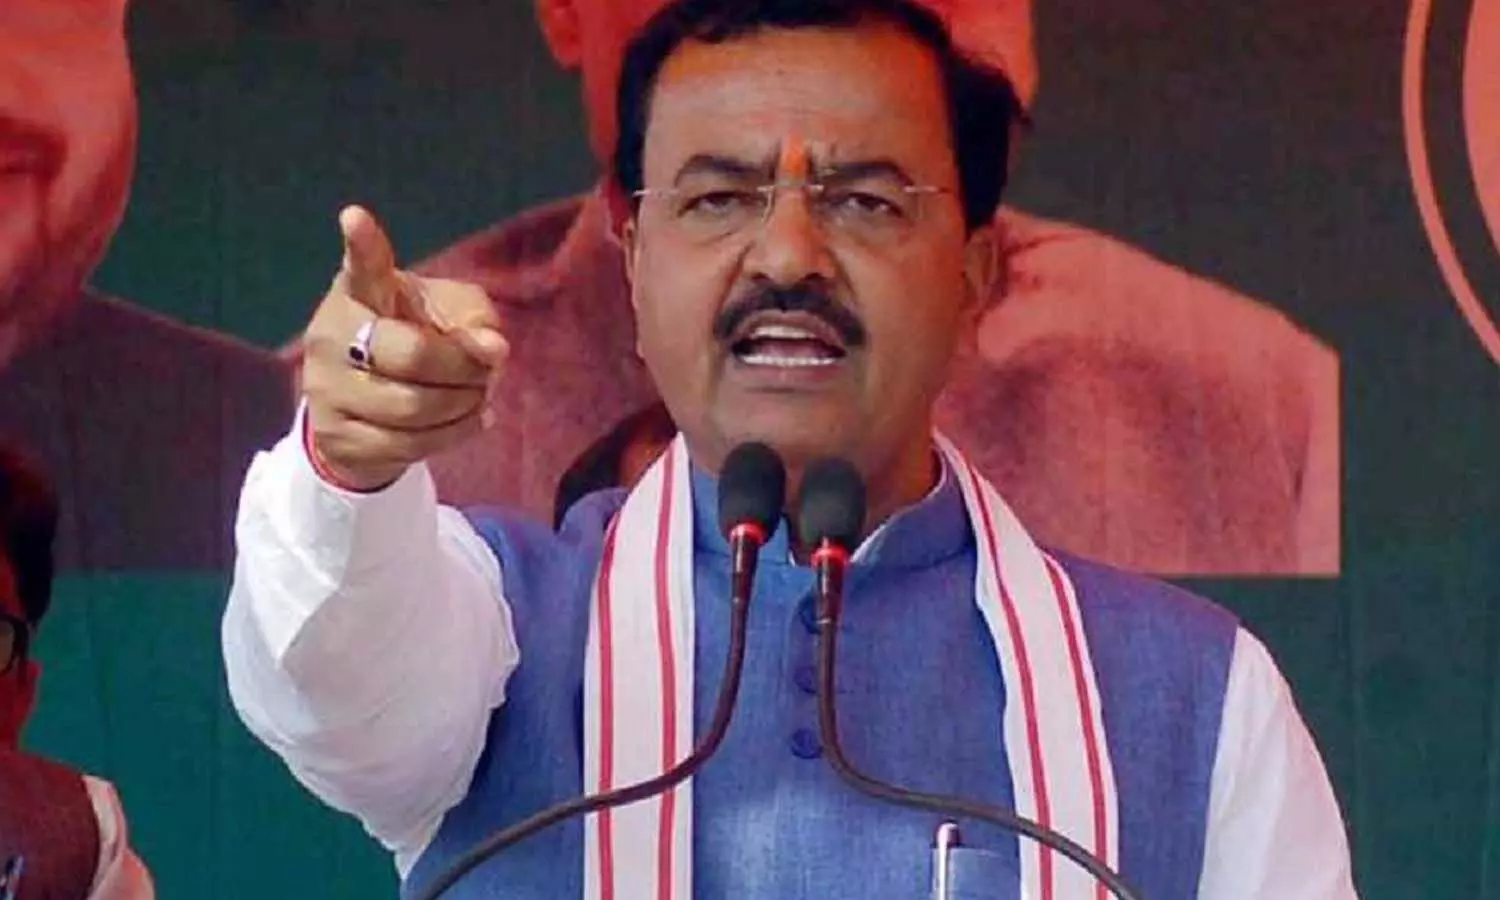 UP Election 2022: Keshav Prasad Maurya said, people engaged in criminal work now have to sell chowmein on the streets